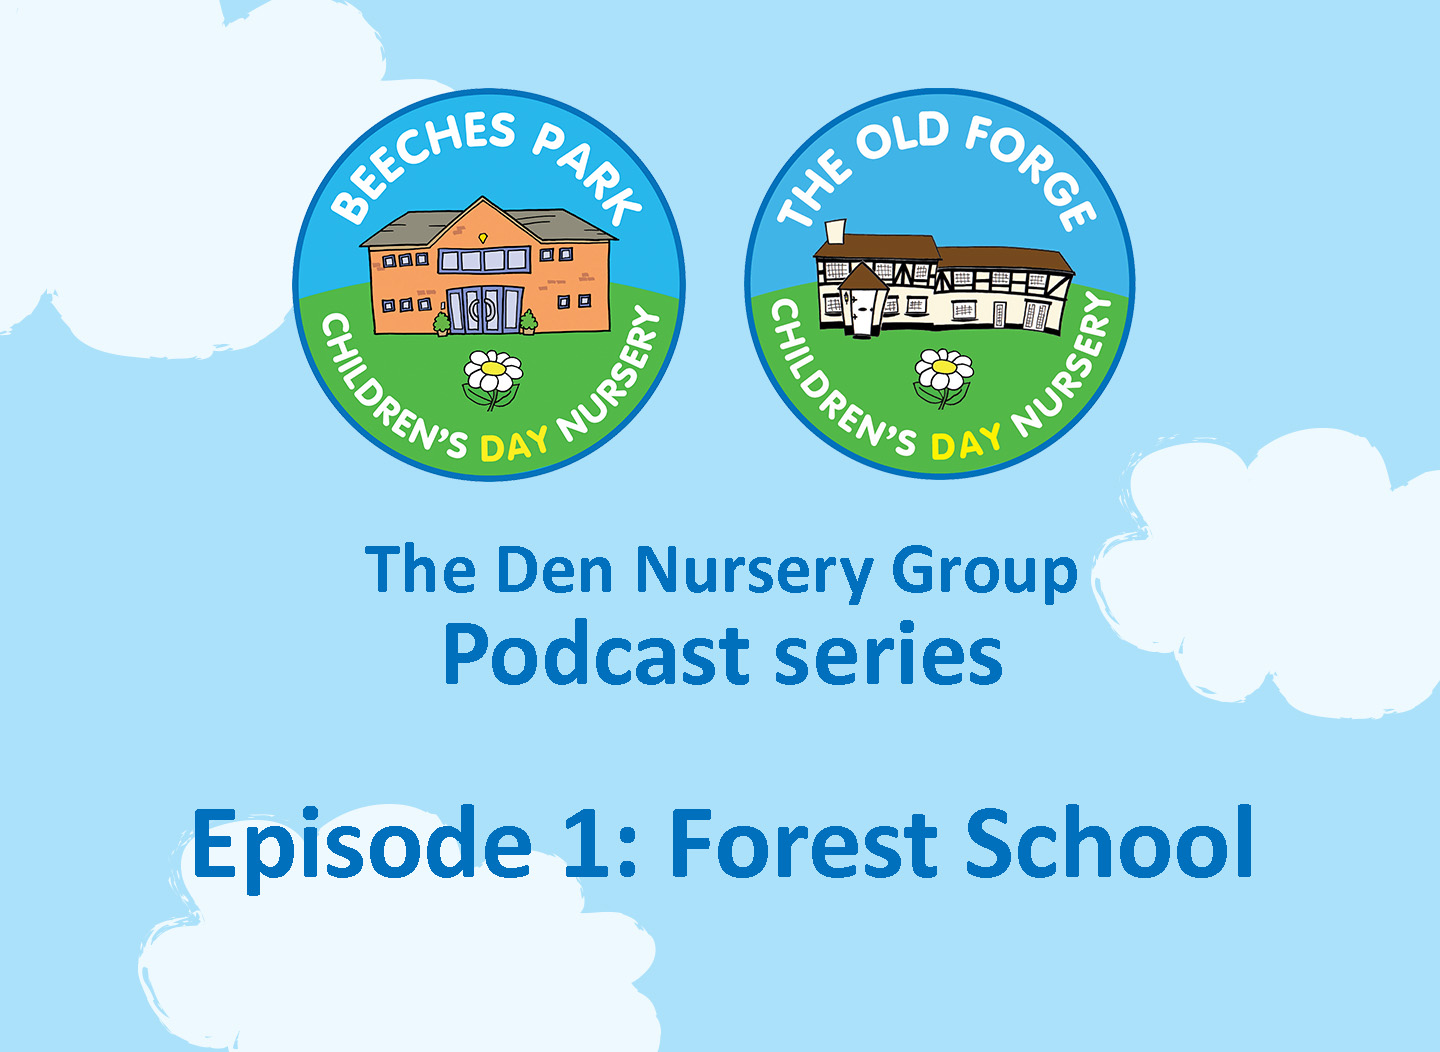 NEW nursery podcast – Episode 1 – Forest School